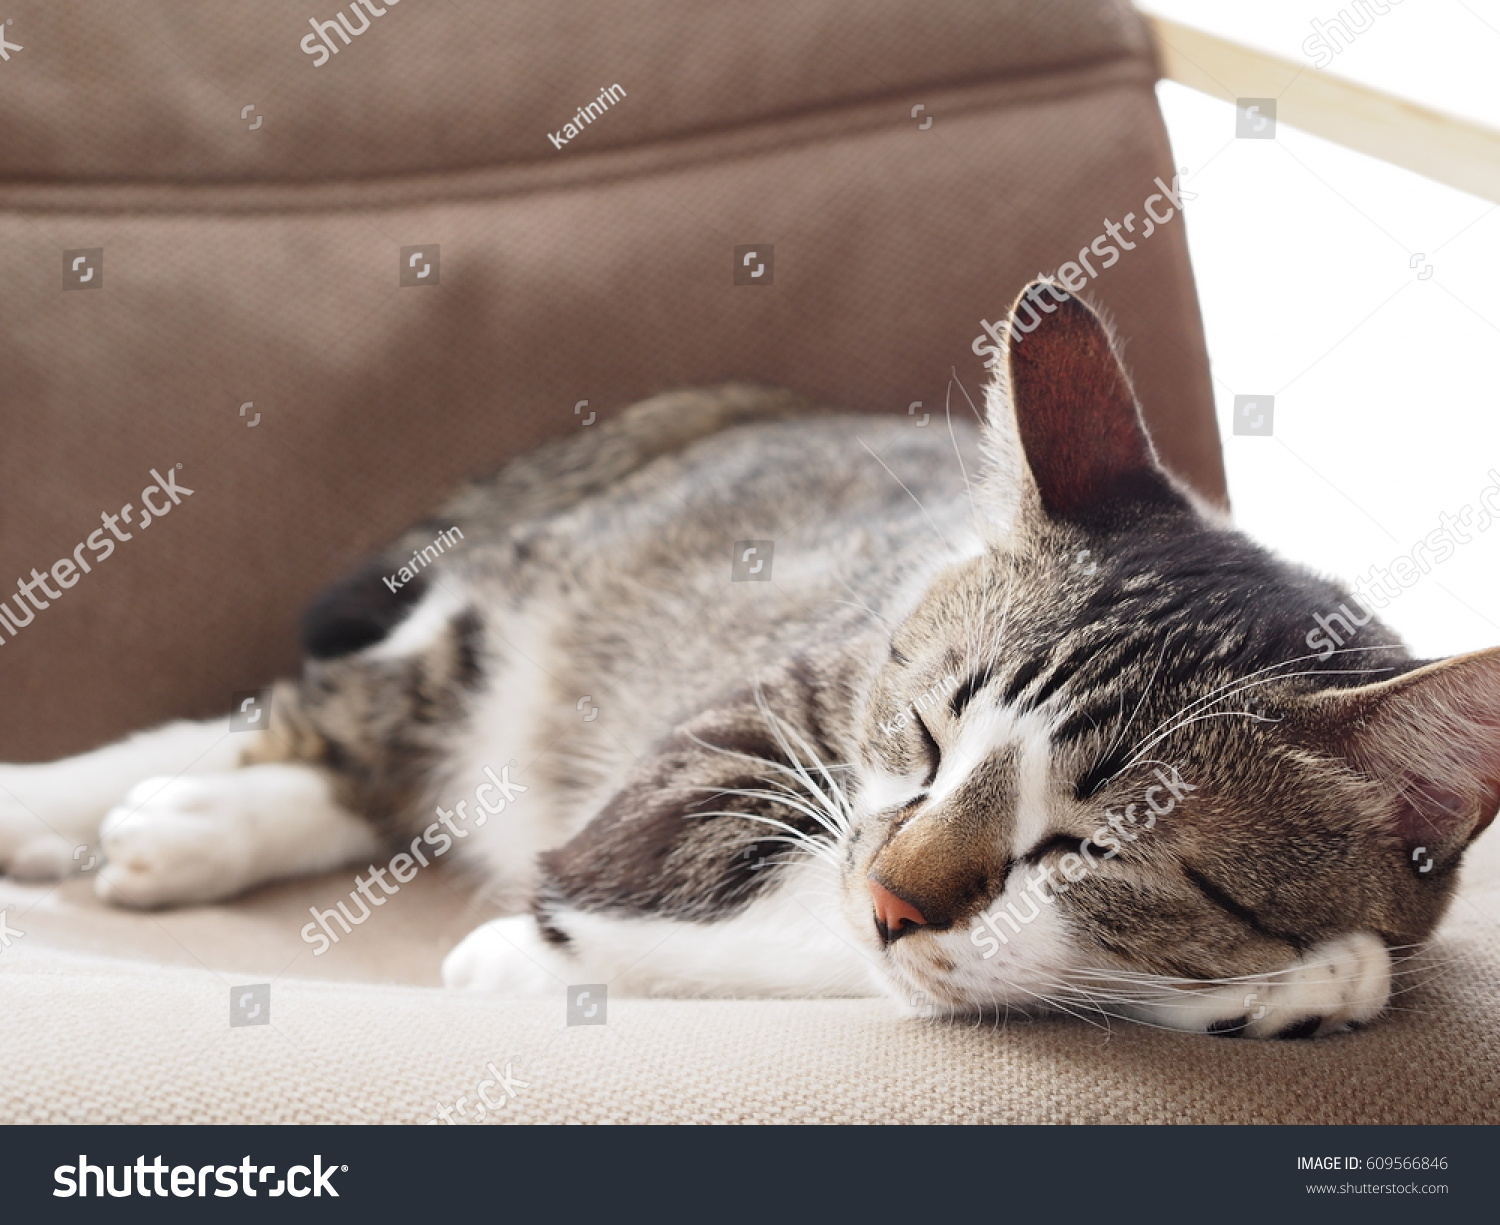 cat sleeping on the chair #609566846